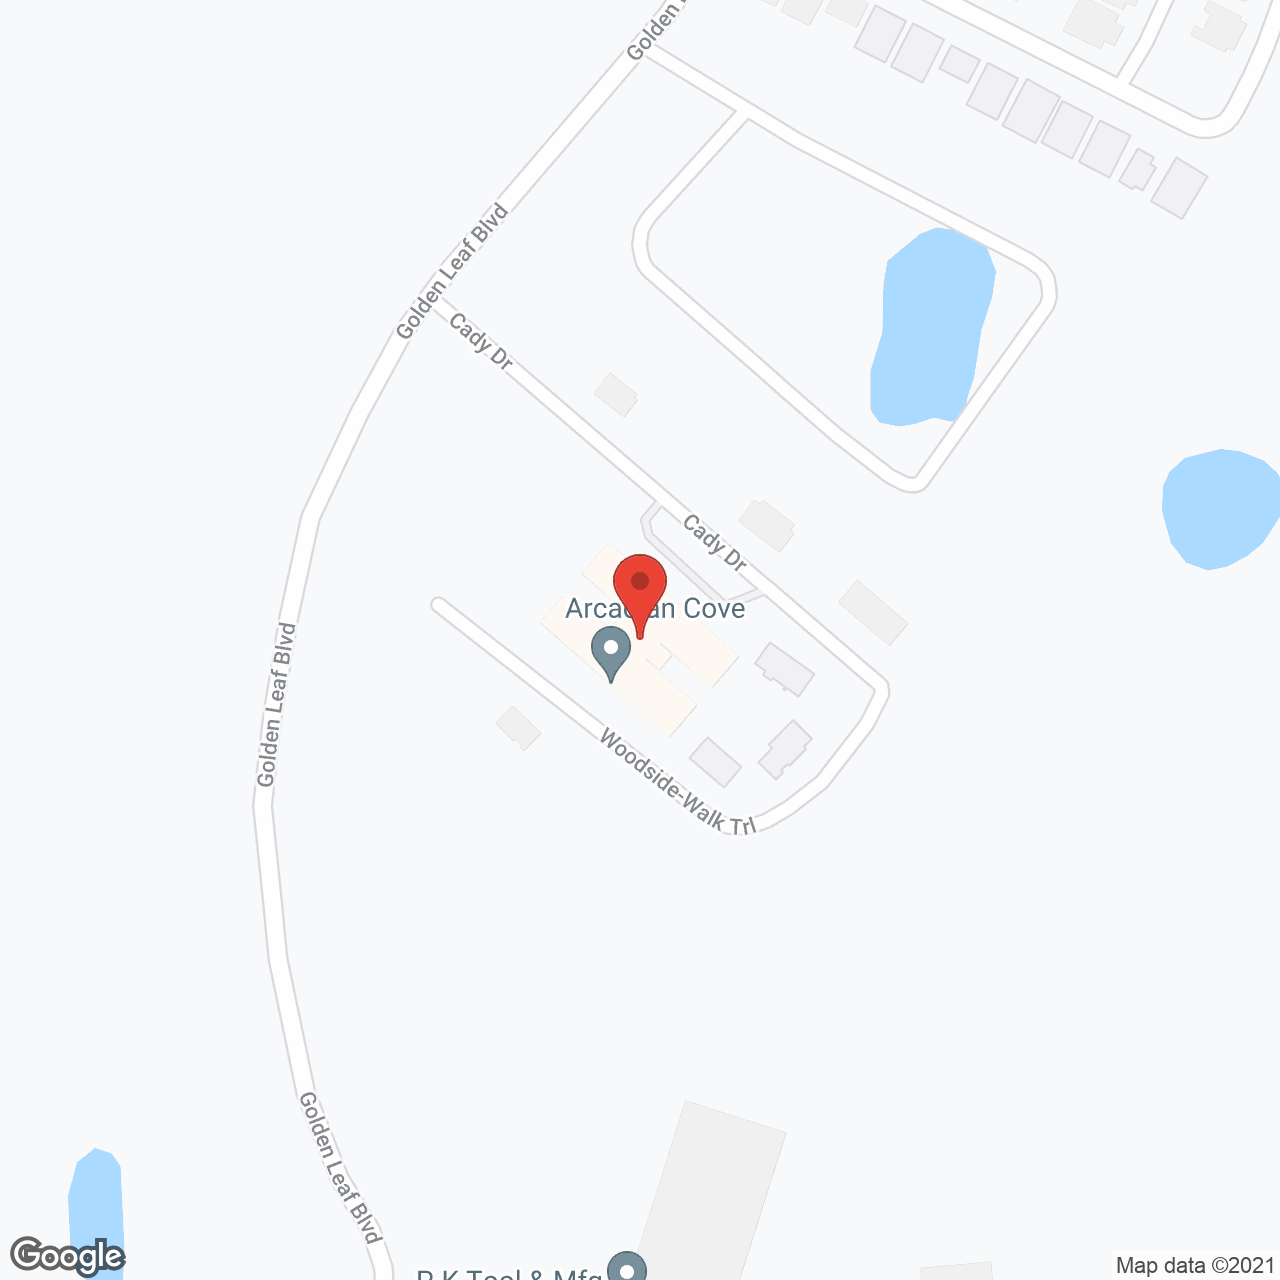 Arcadian Cove in google map